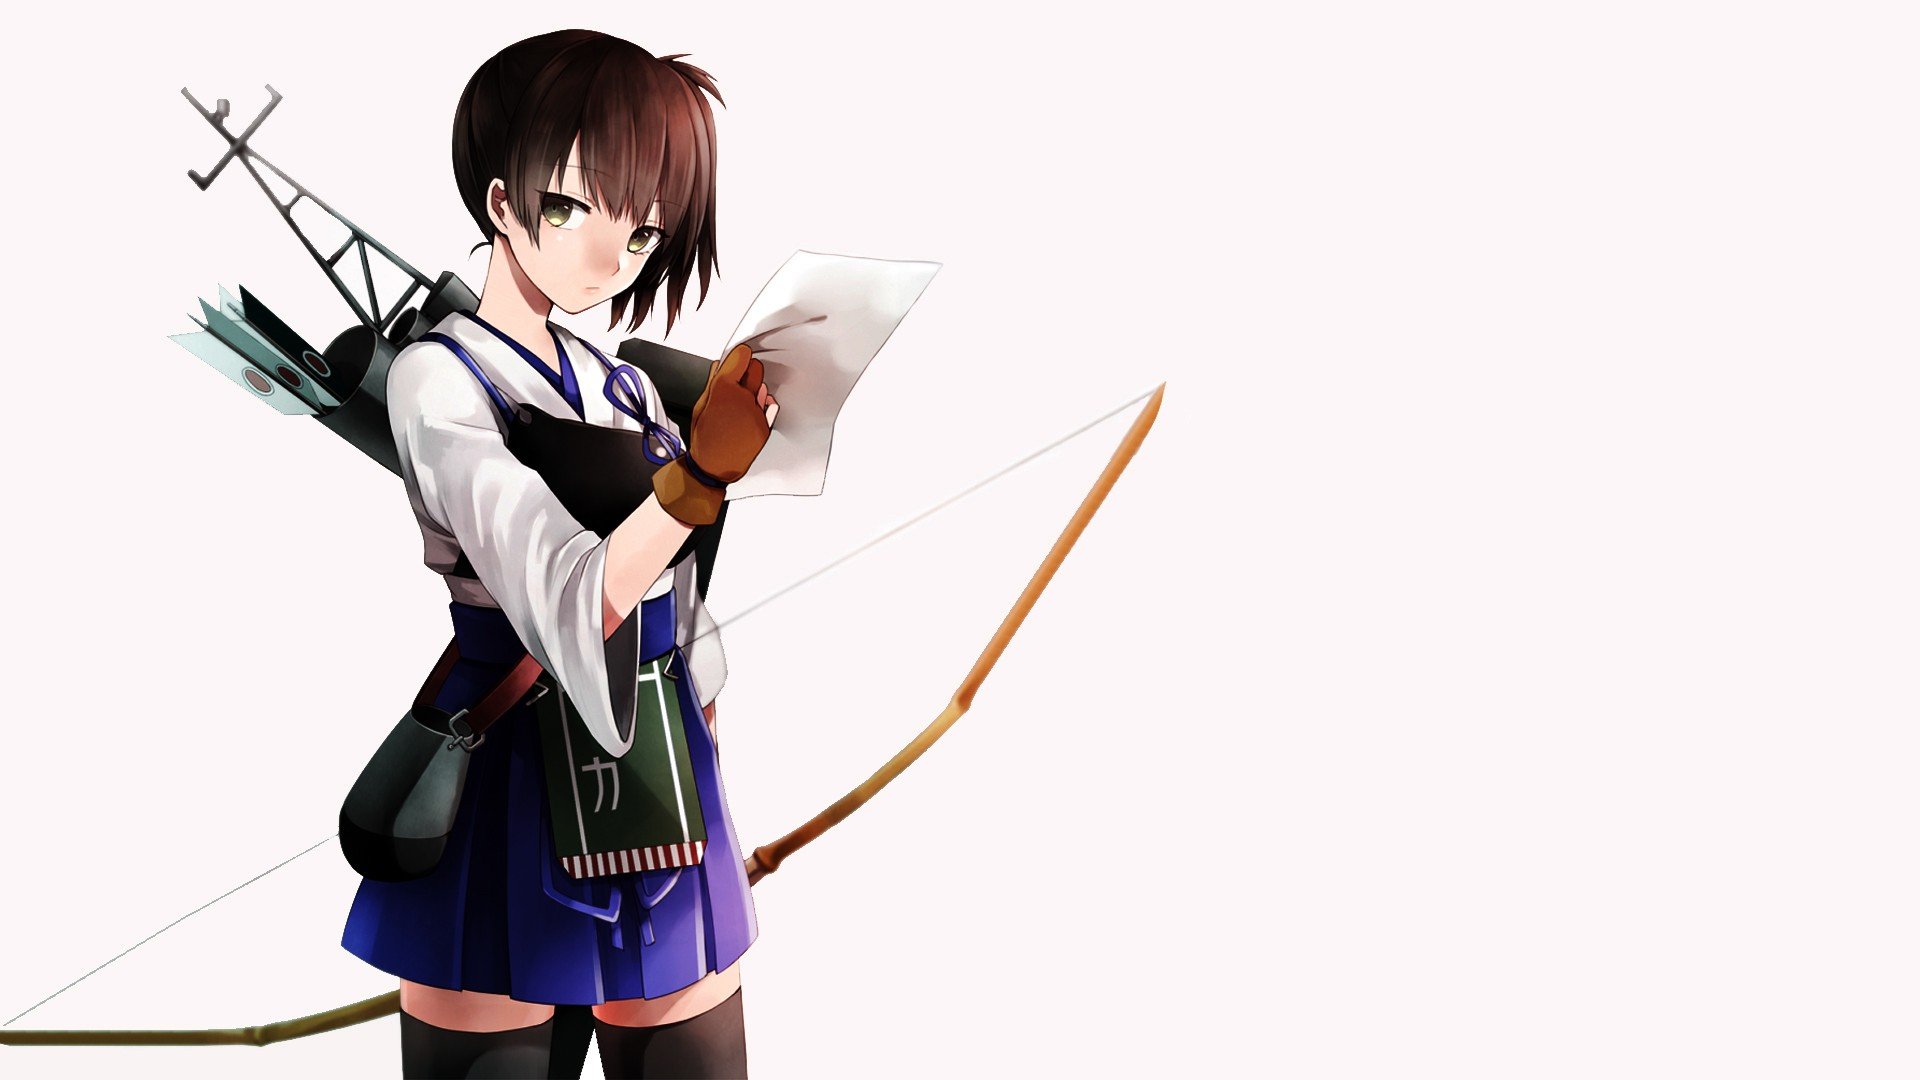 stockings, Bows, Anime, Arrows, Archery, Anime, Girls, Original, Characters, Kantai, Collection Wallpaper